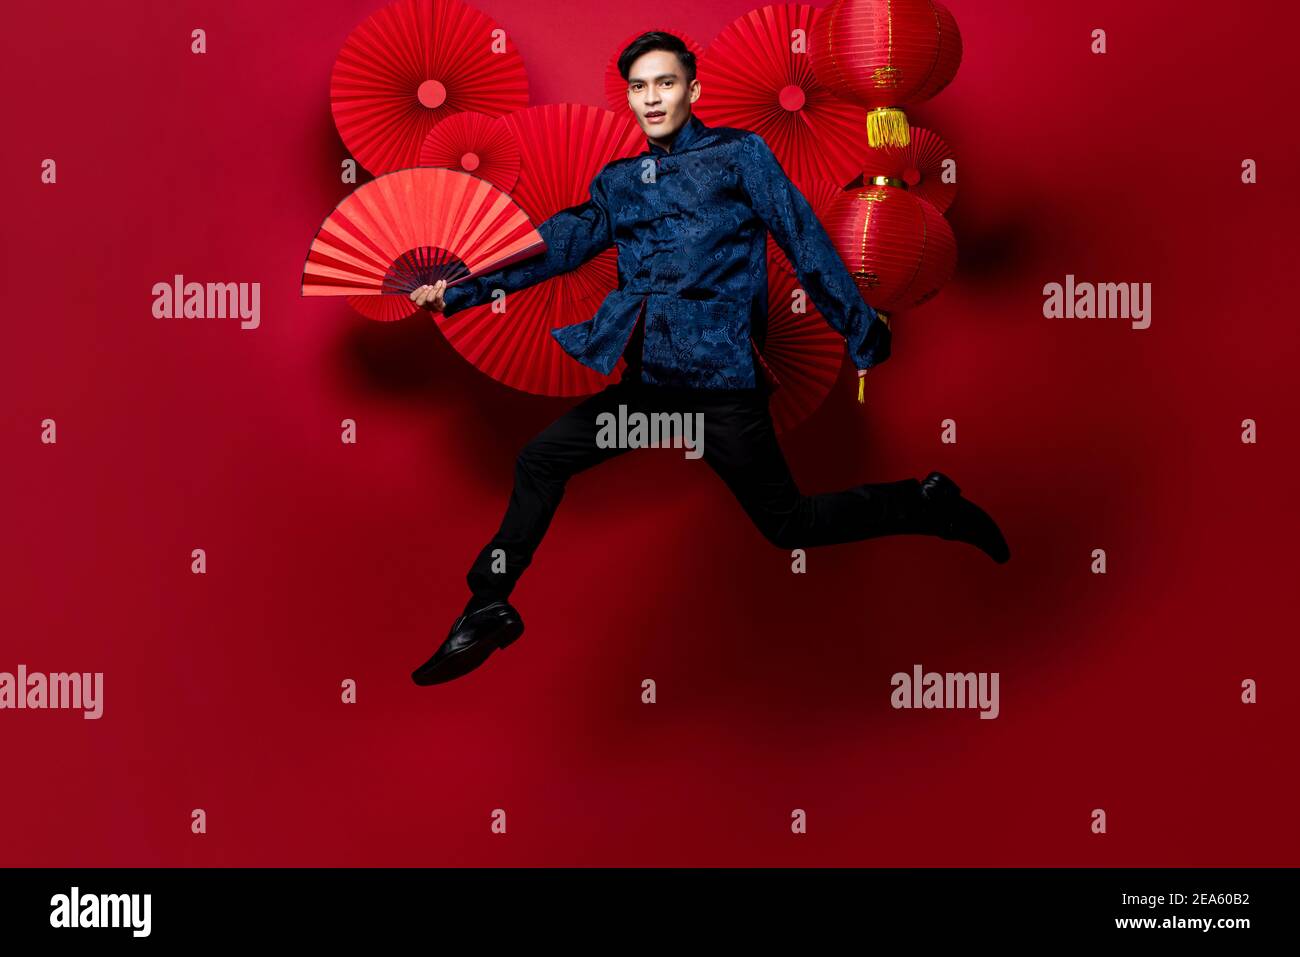 Asian man in traditional costume holding fan and jumping in oriental style decorated red background for Chinese new year concepts Stock Photo